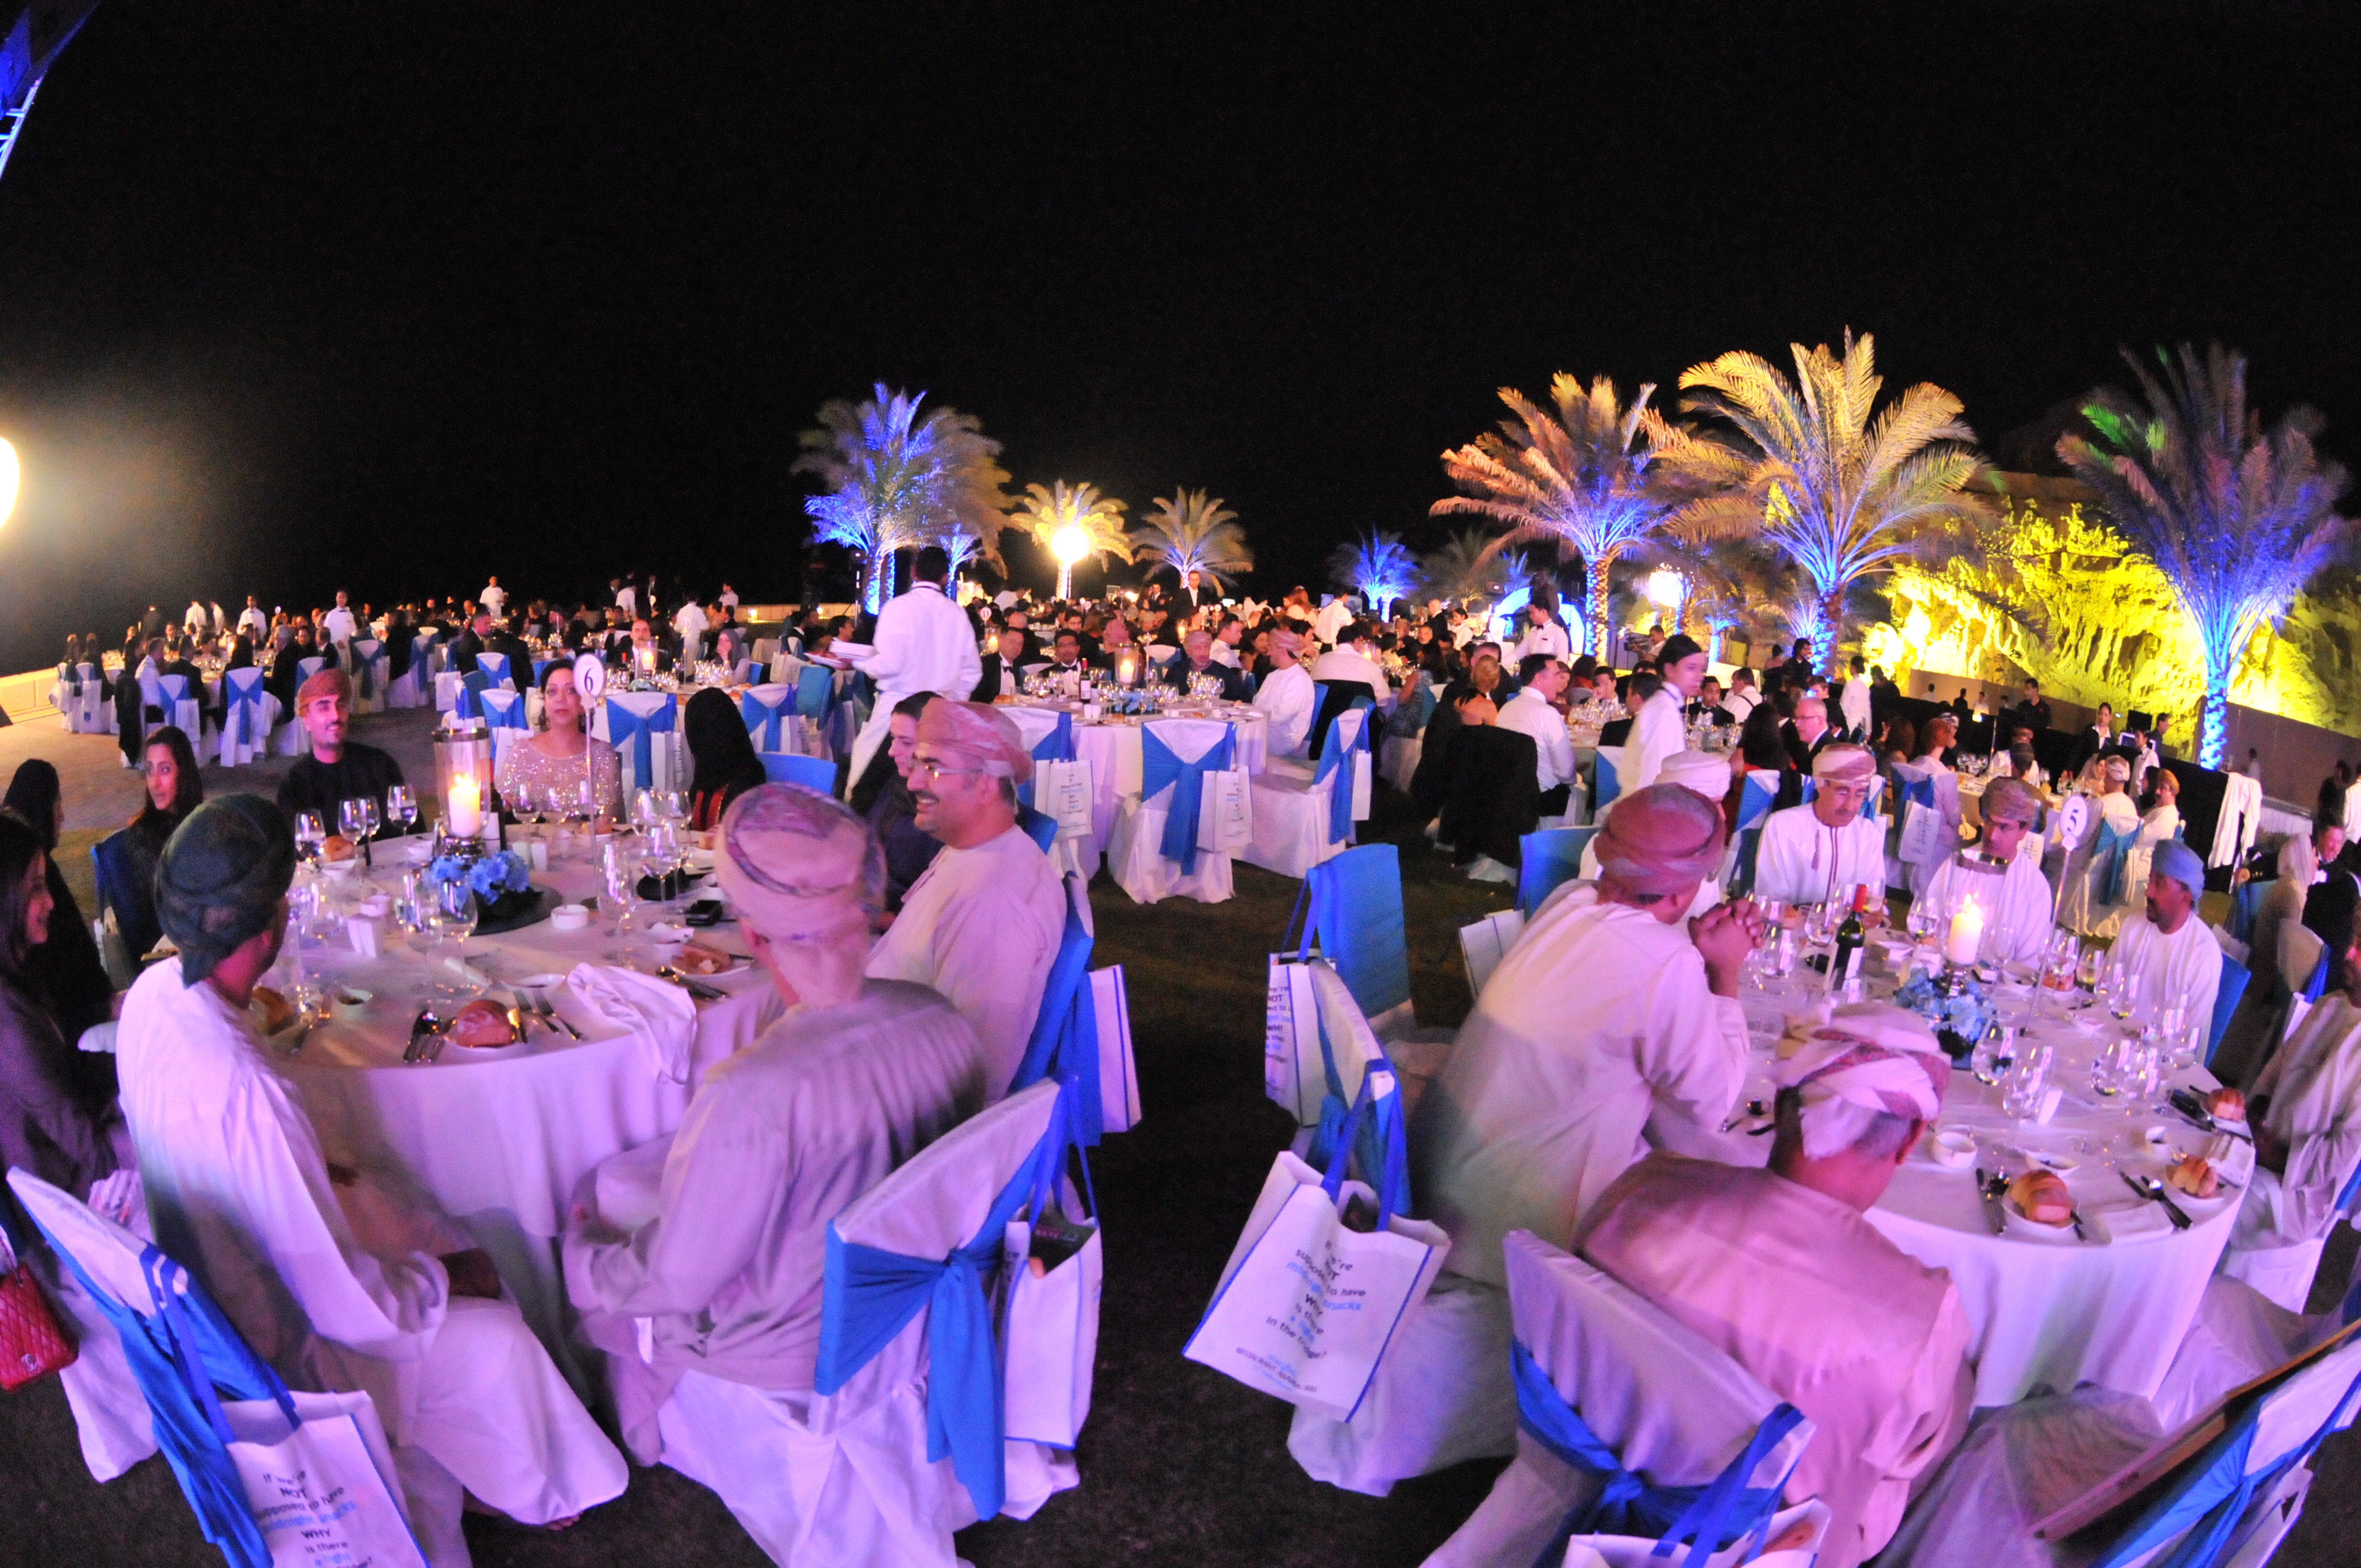 Real Life Wedding & Events – The Oman Restaurant Awards – The Best Singing Waiters